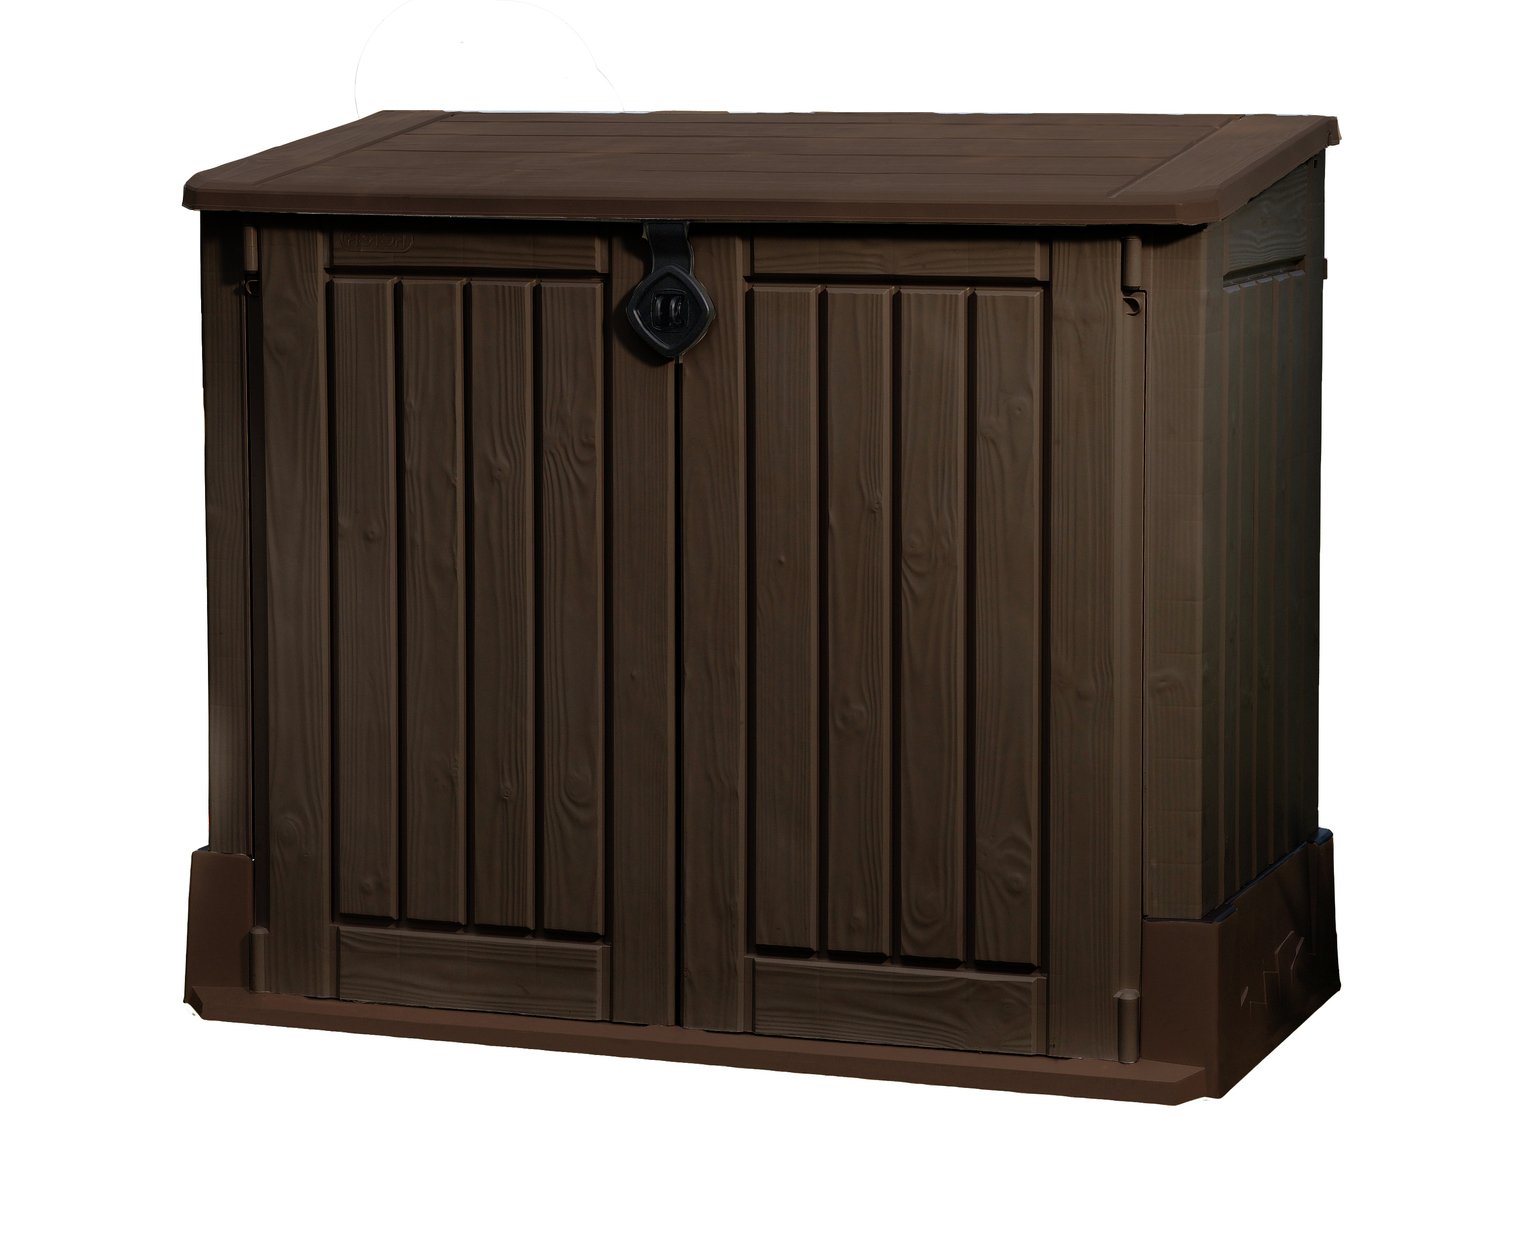 Keter Store It Out Midi 845L Garden Storage Shed - Brown